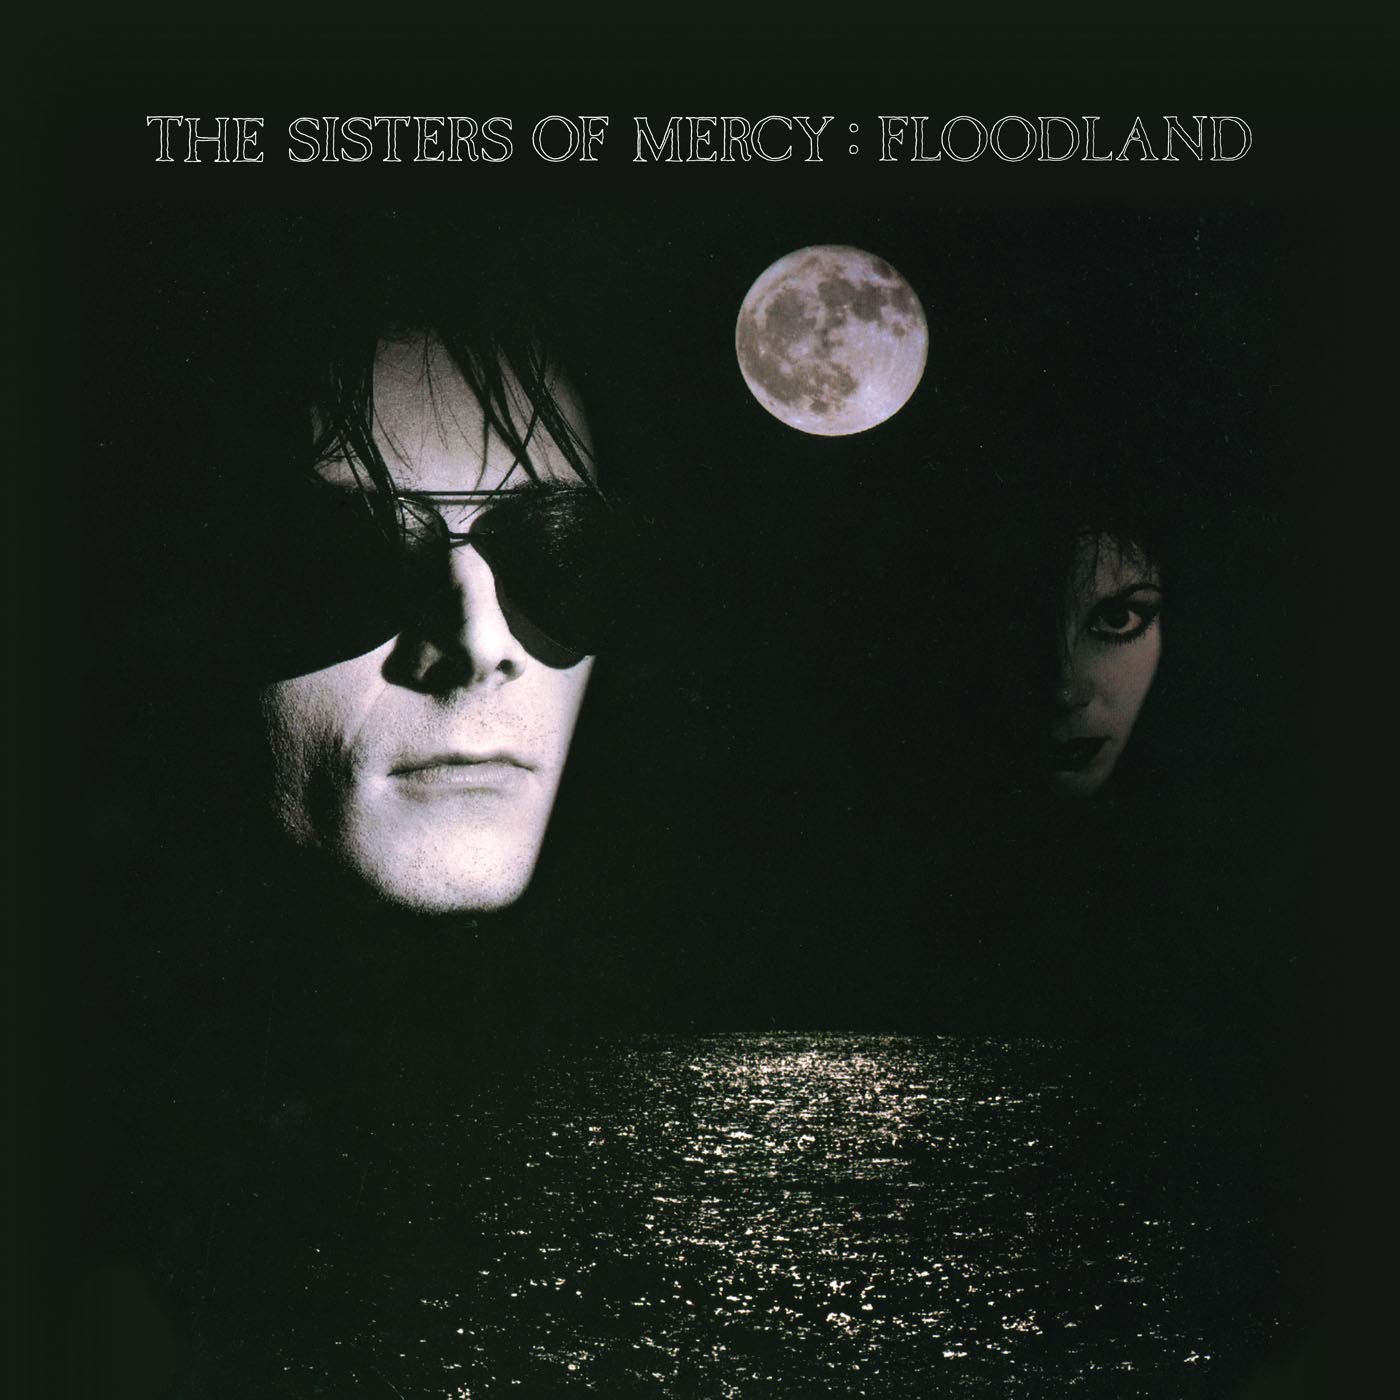 THE SISTERS OF MERCY "Floodland" LP